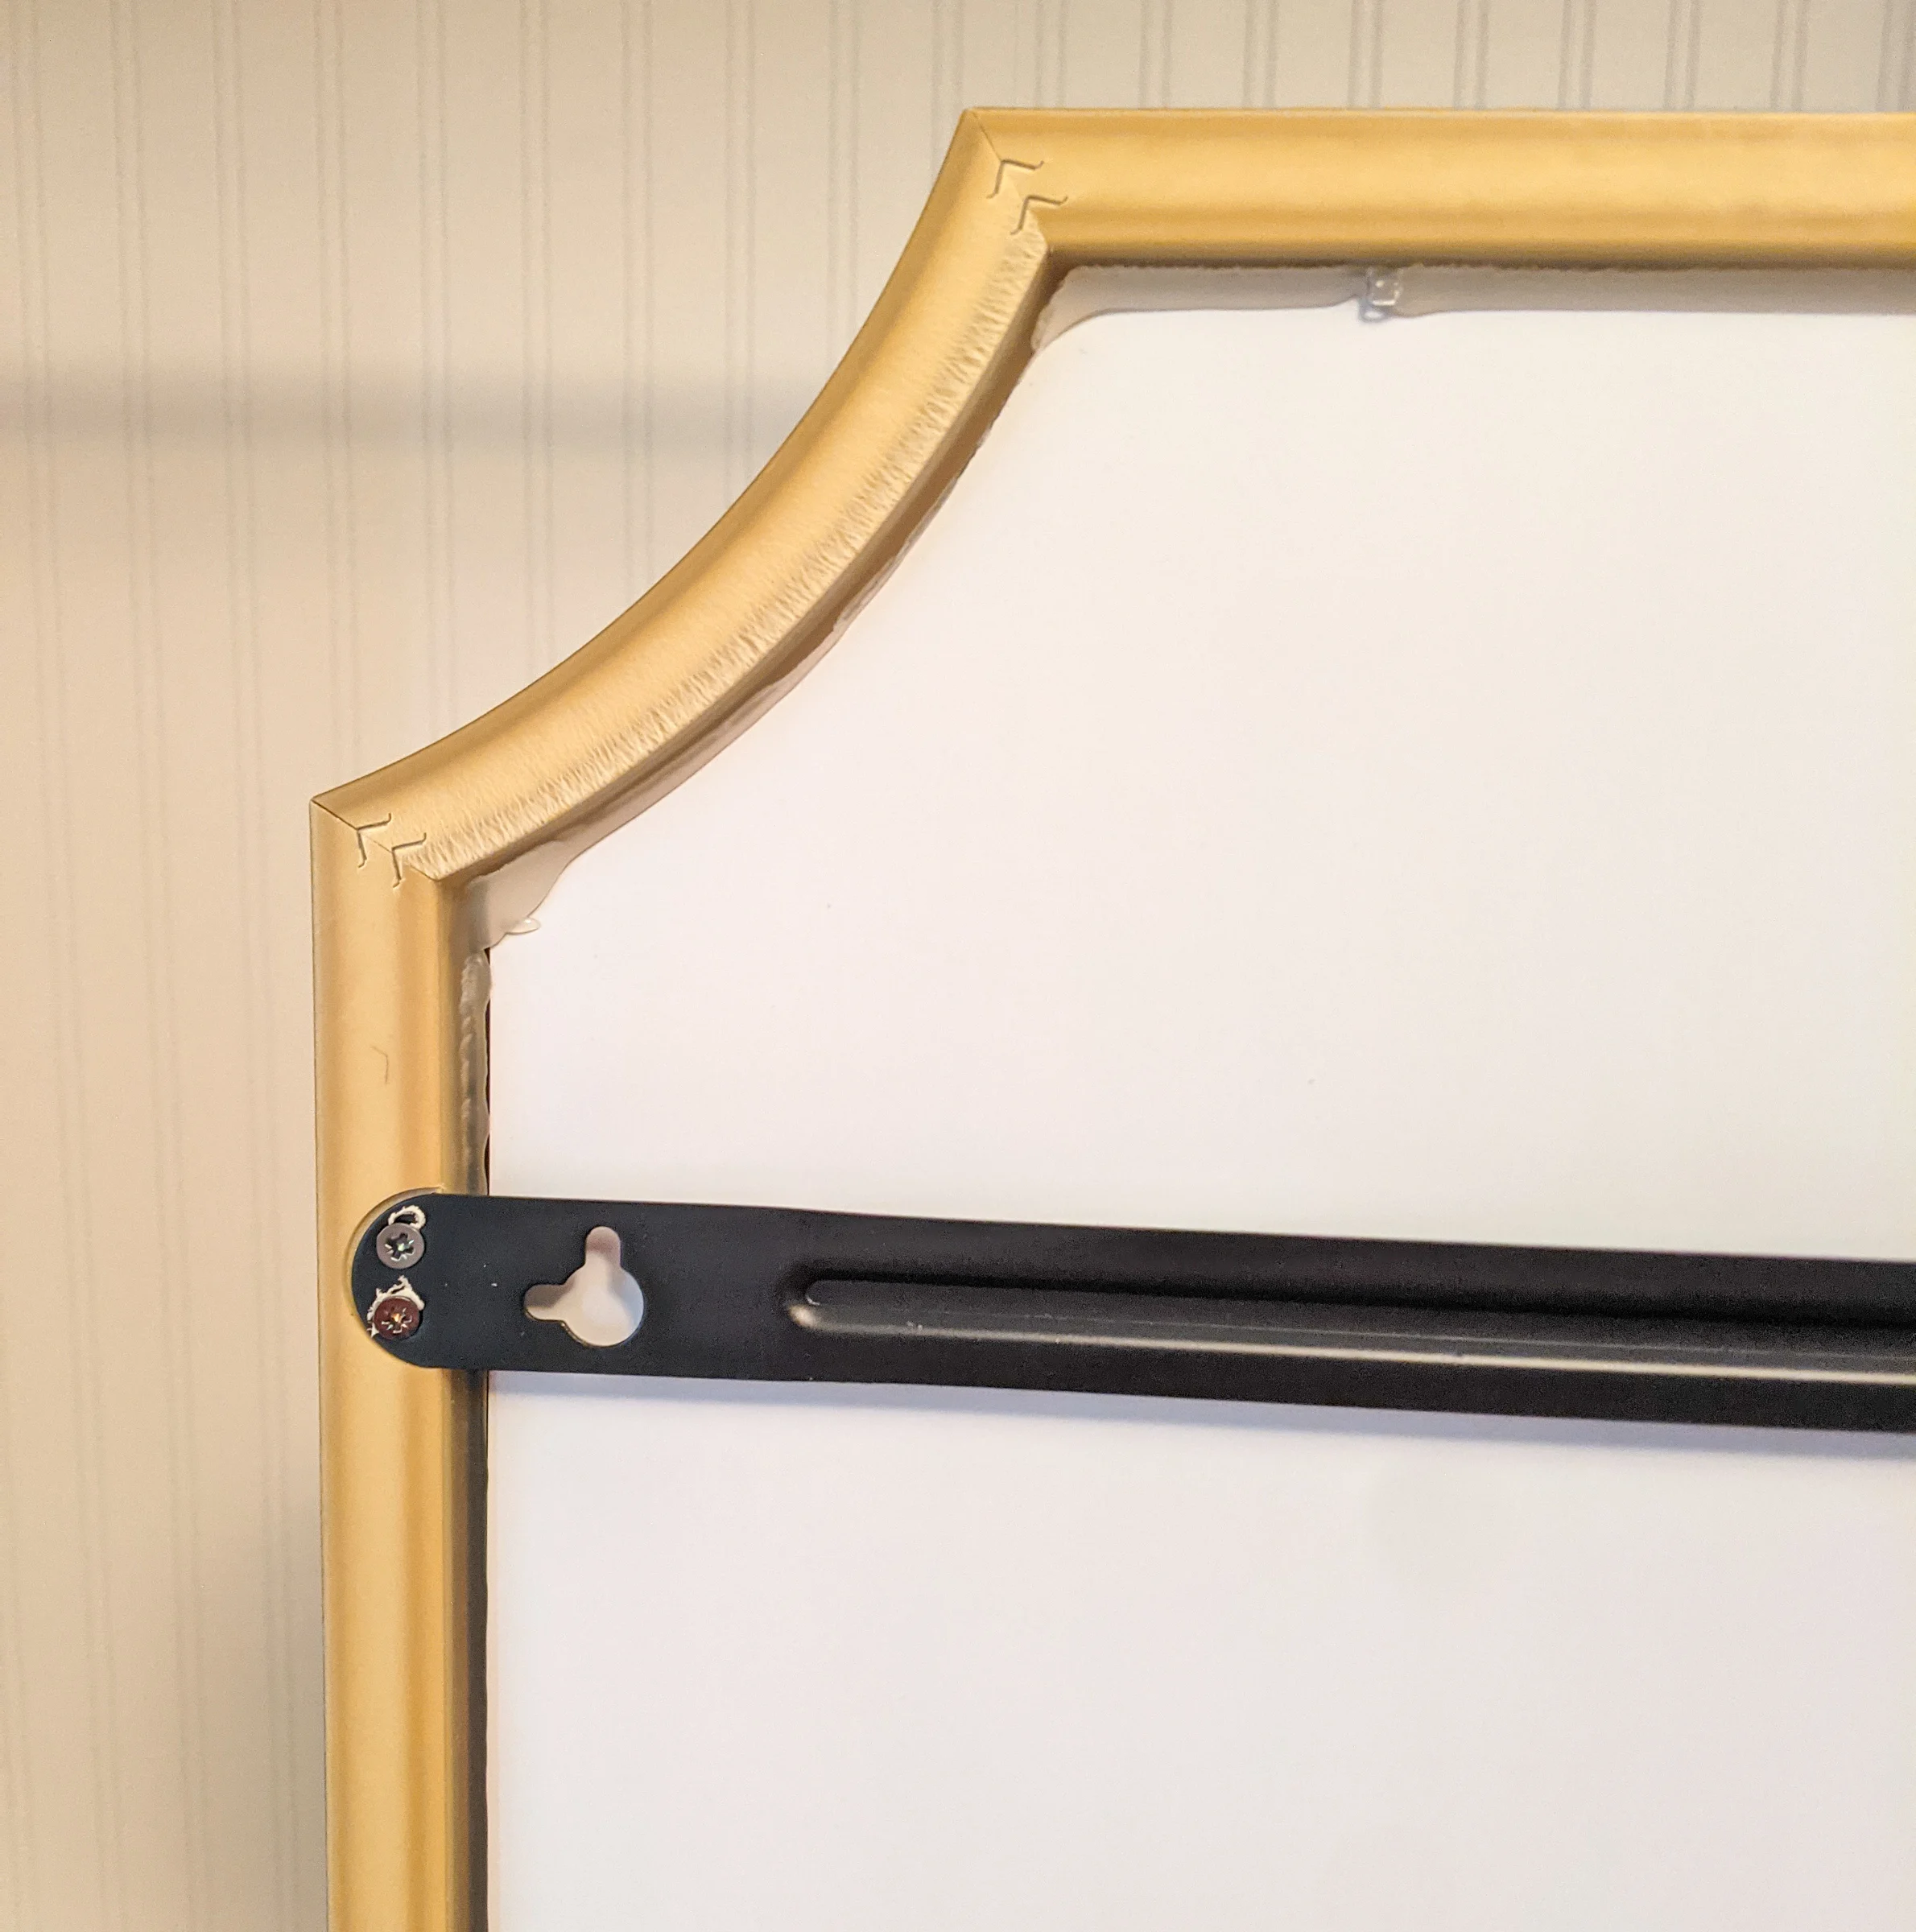 A close-up of the back side of the smear shows the support bars and hanging bracket, plus the back side of the frame and glue holding the mirror in the frame.